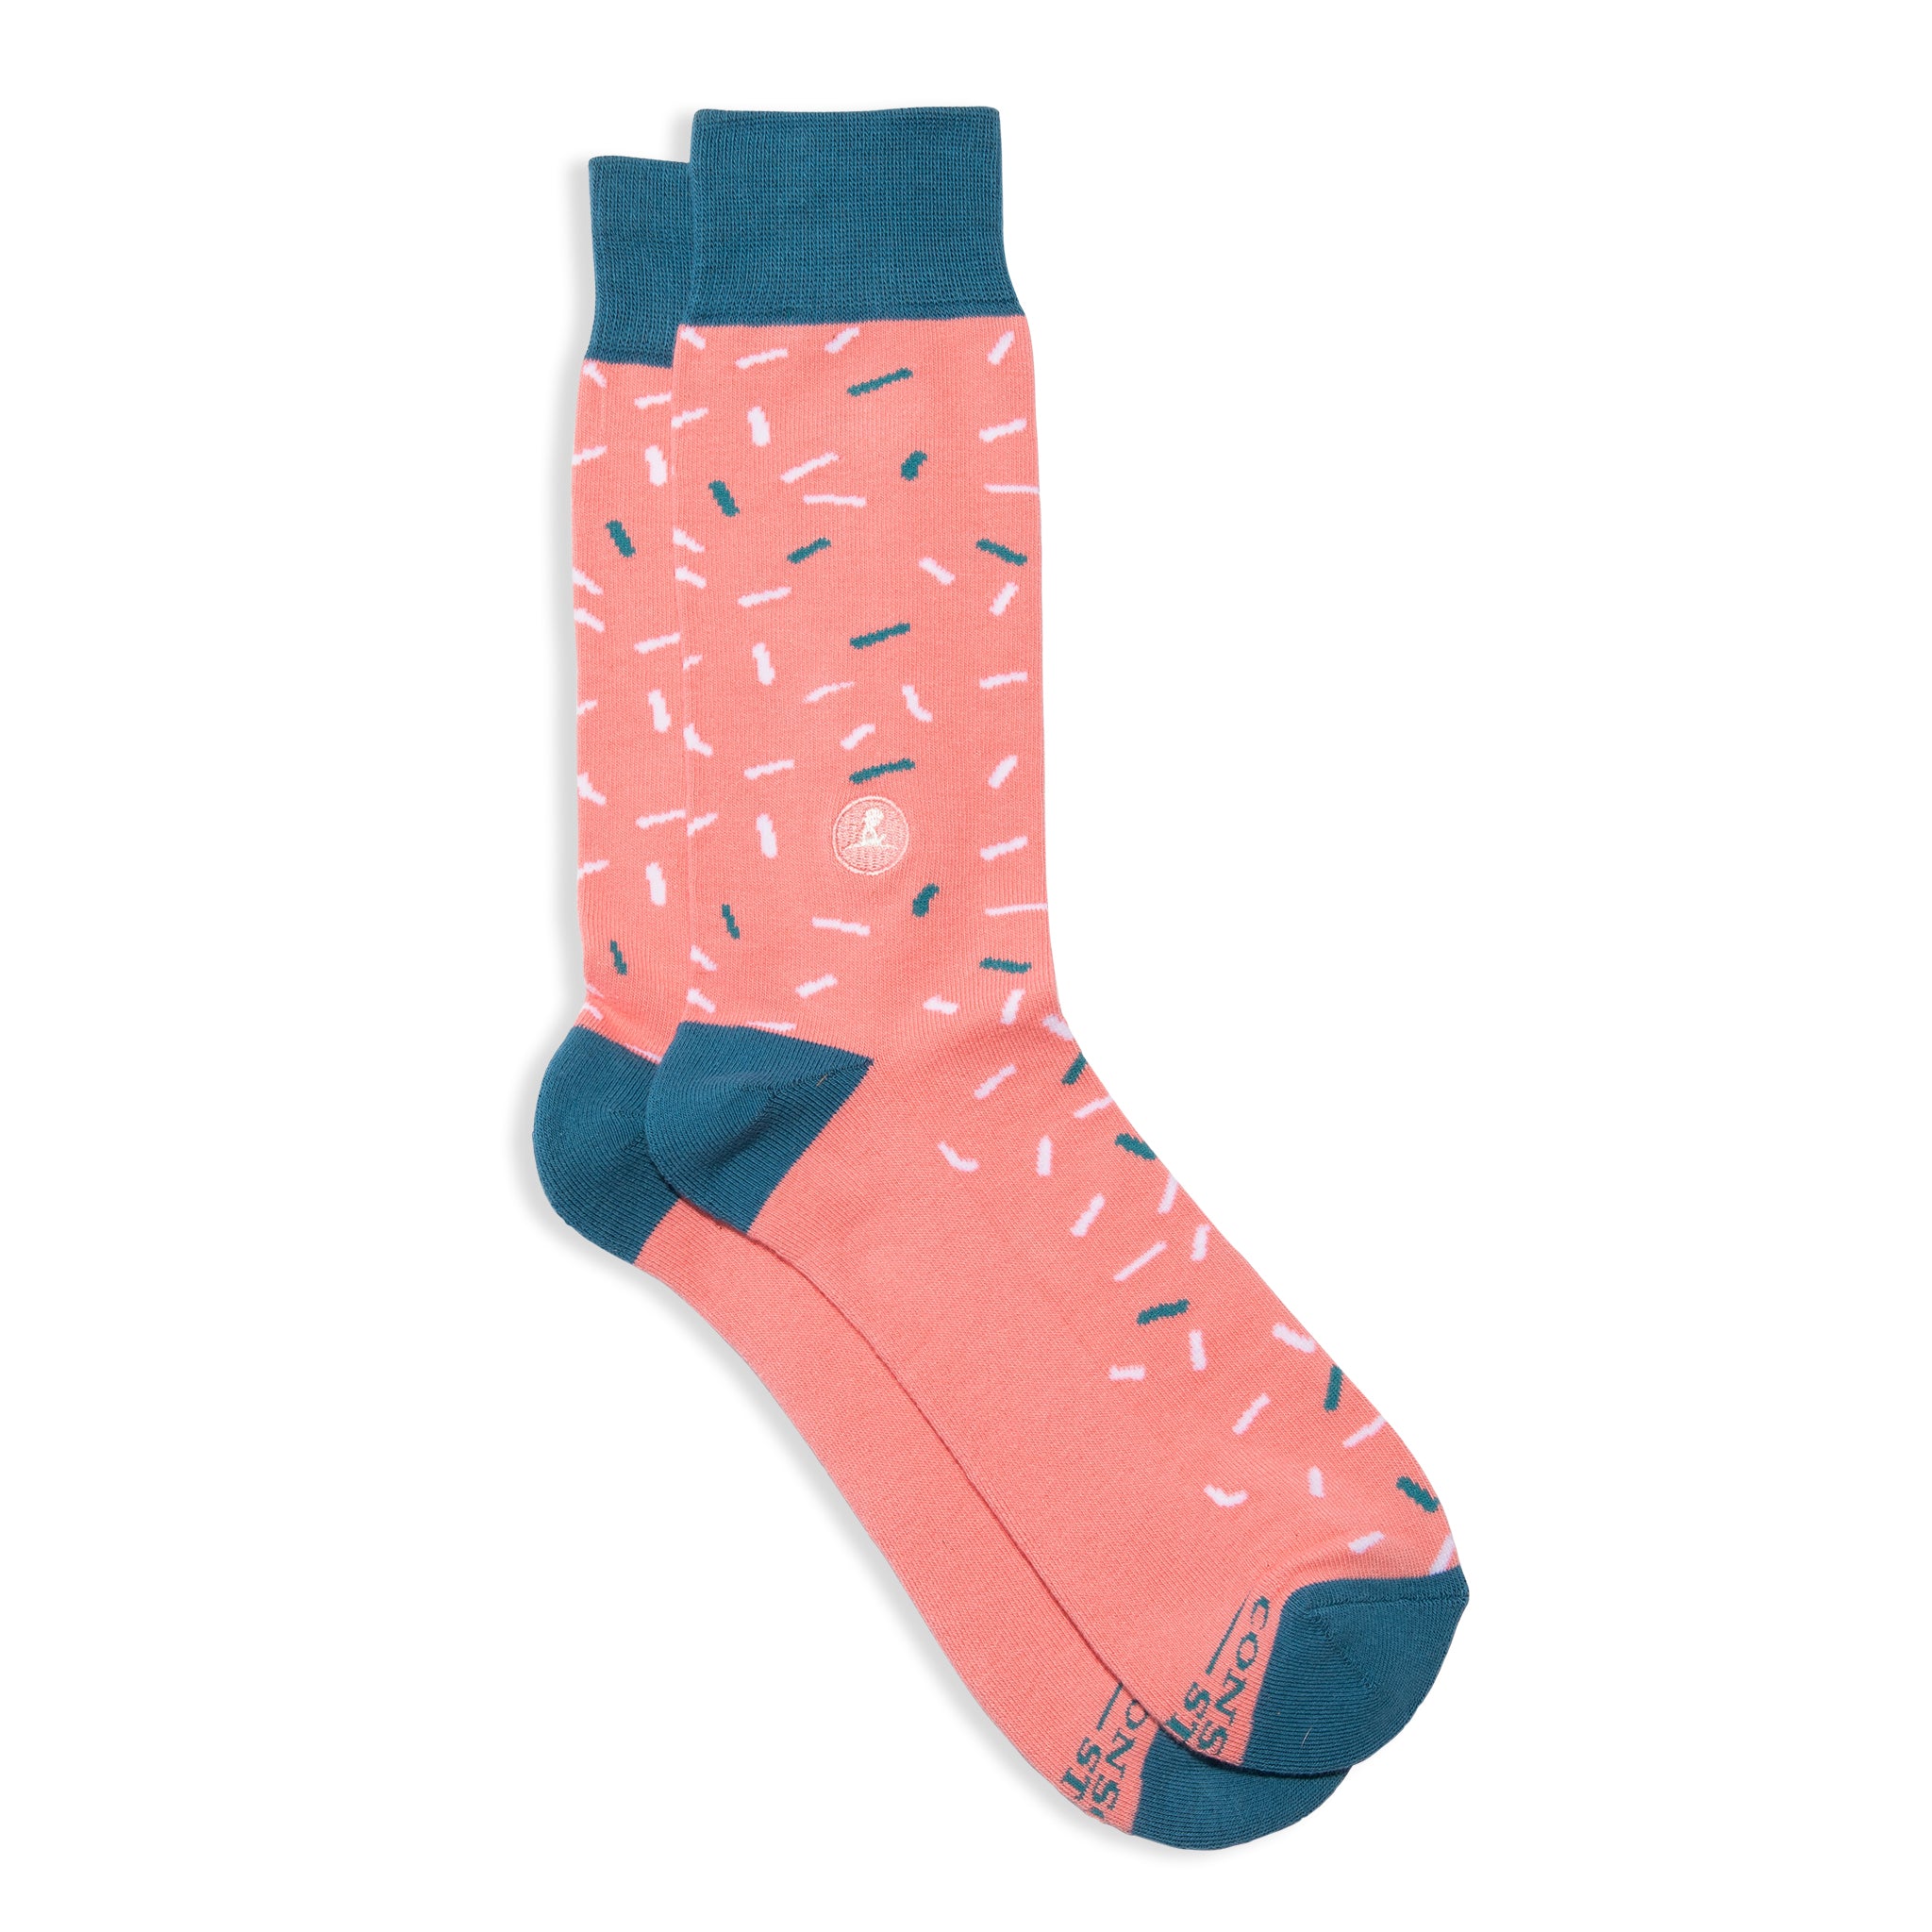 Image of Socks that Find a Cure